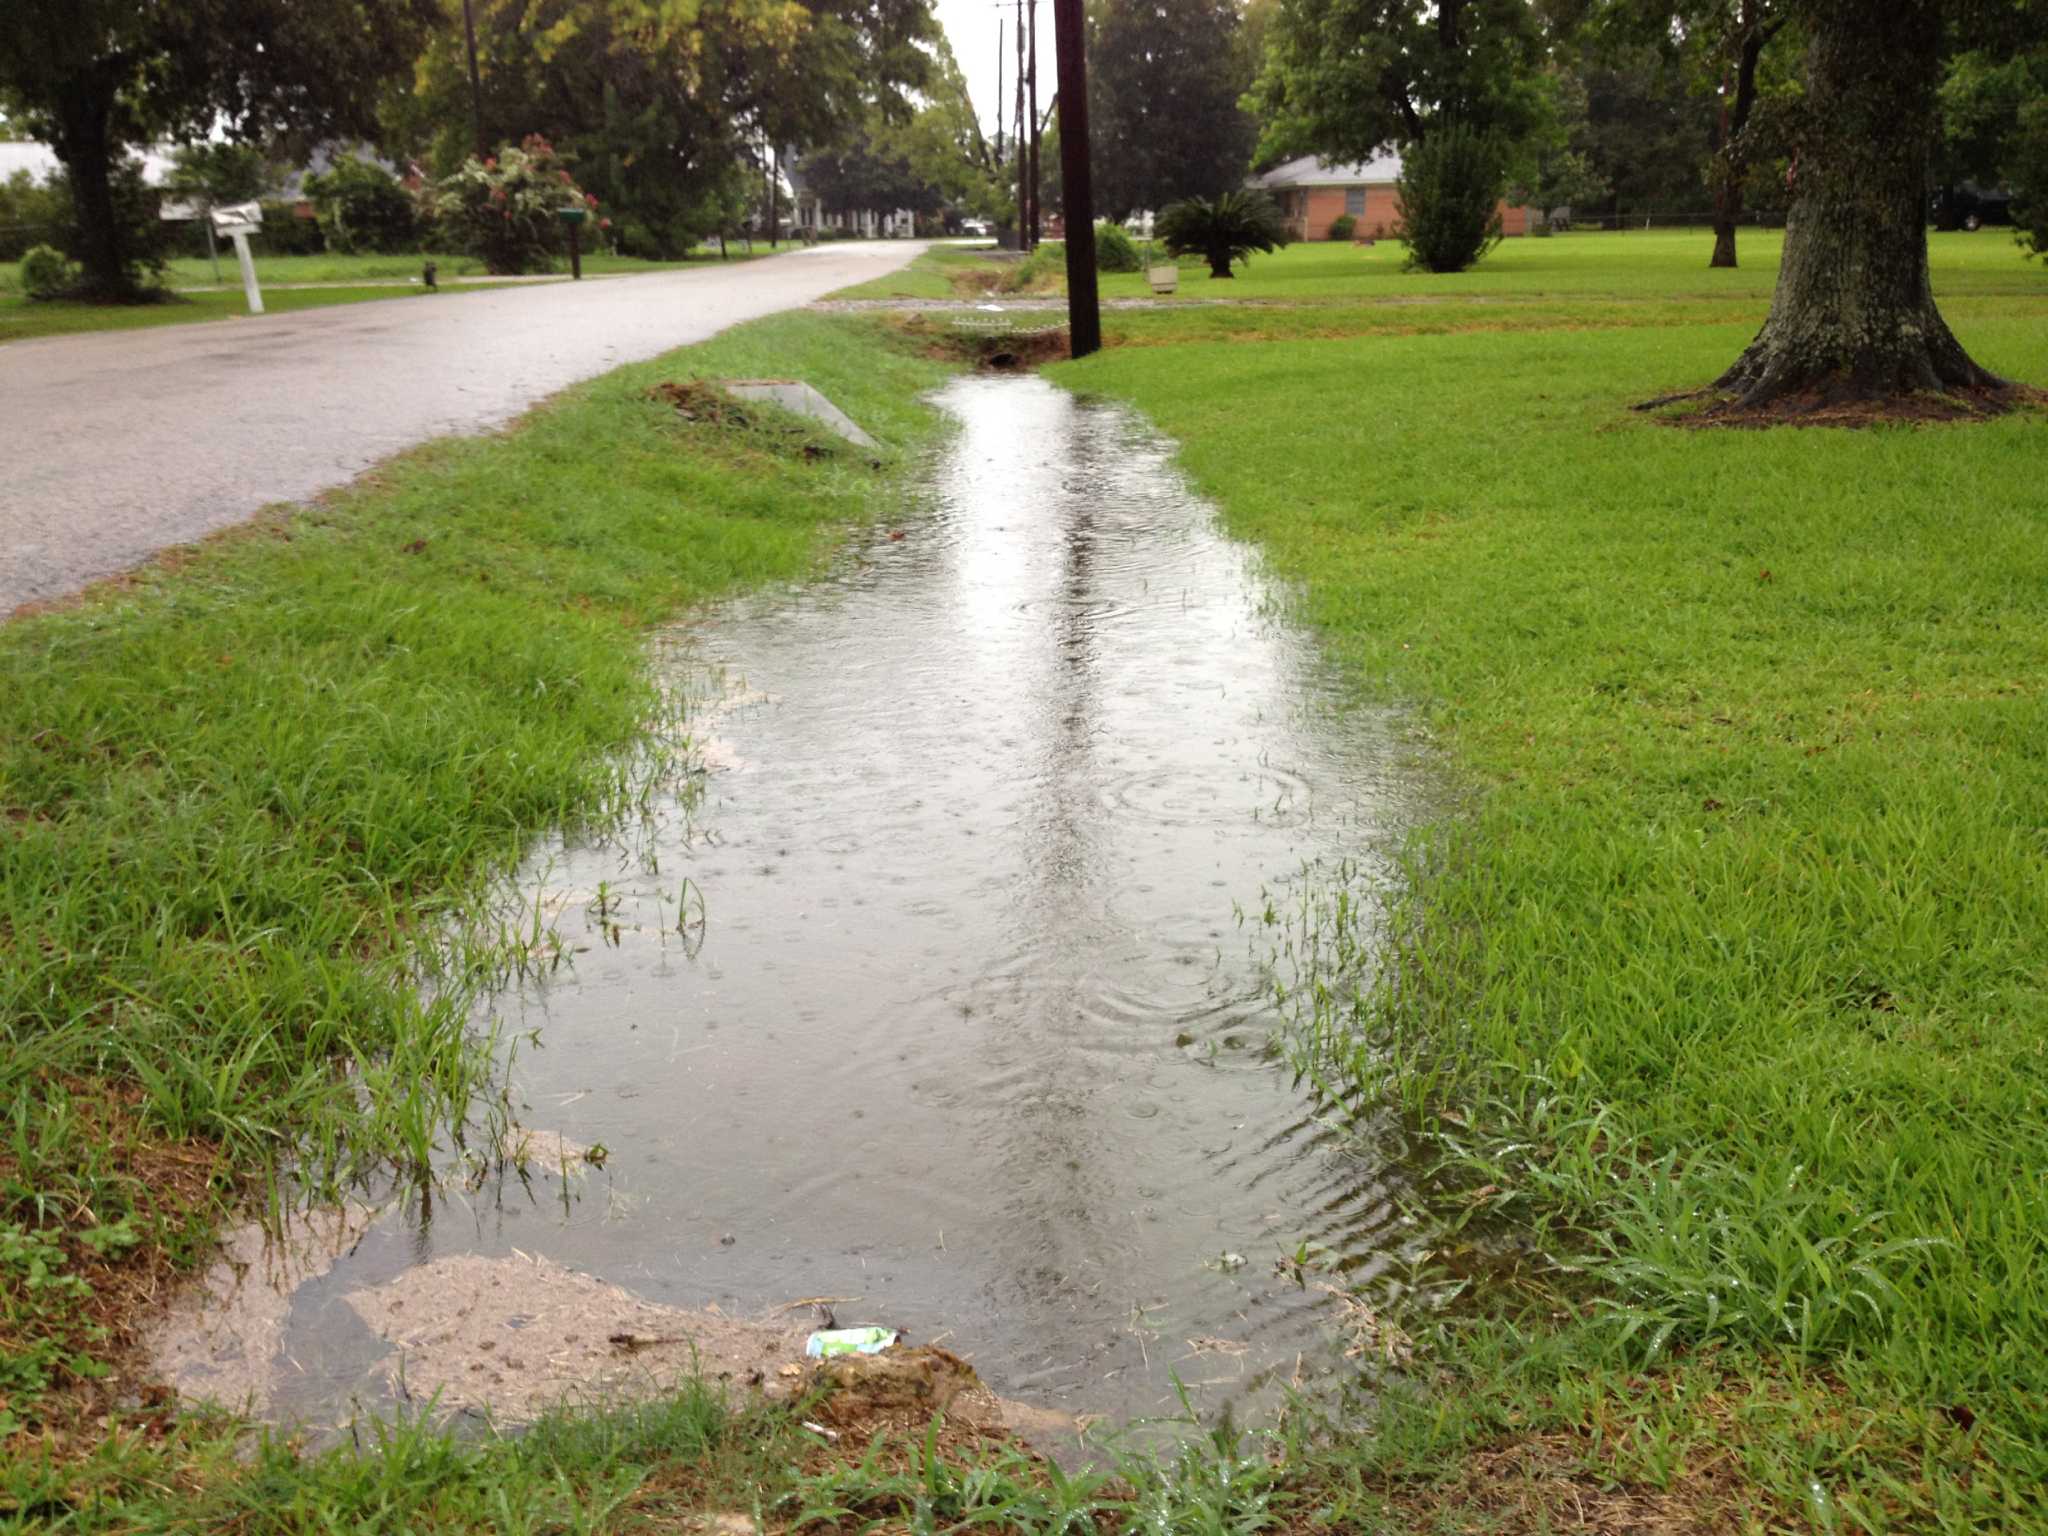 Dangerous things from Millennial's childhood fix standing water in ditch - Ita 3334